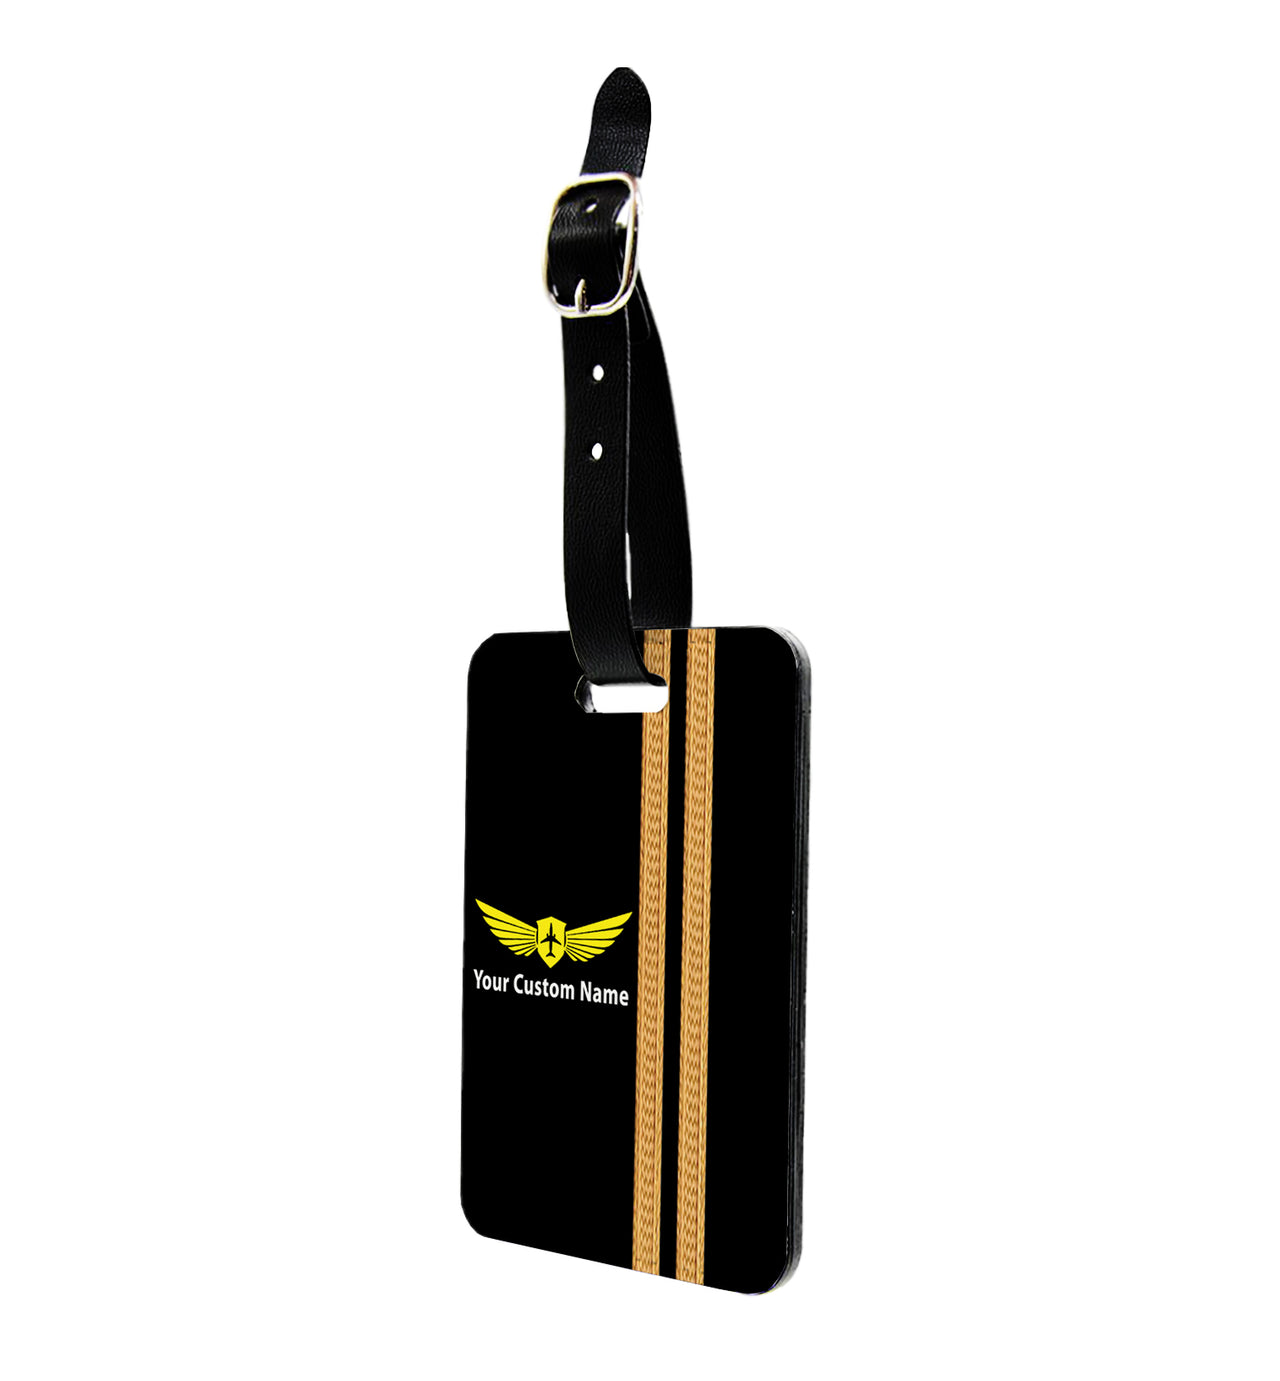 Customizable Name & Badge & Golden Special Pilot Epaulettes (4,3,2 Lines) Designed Luggage Tag